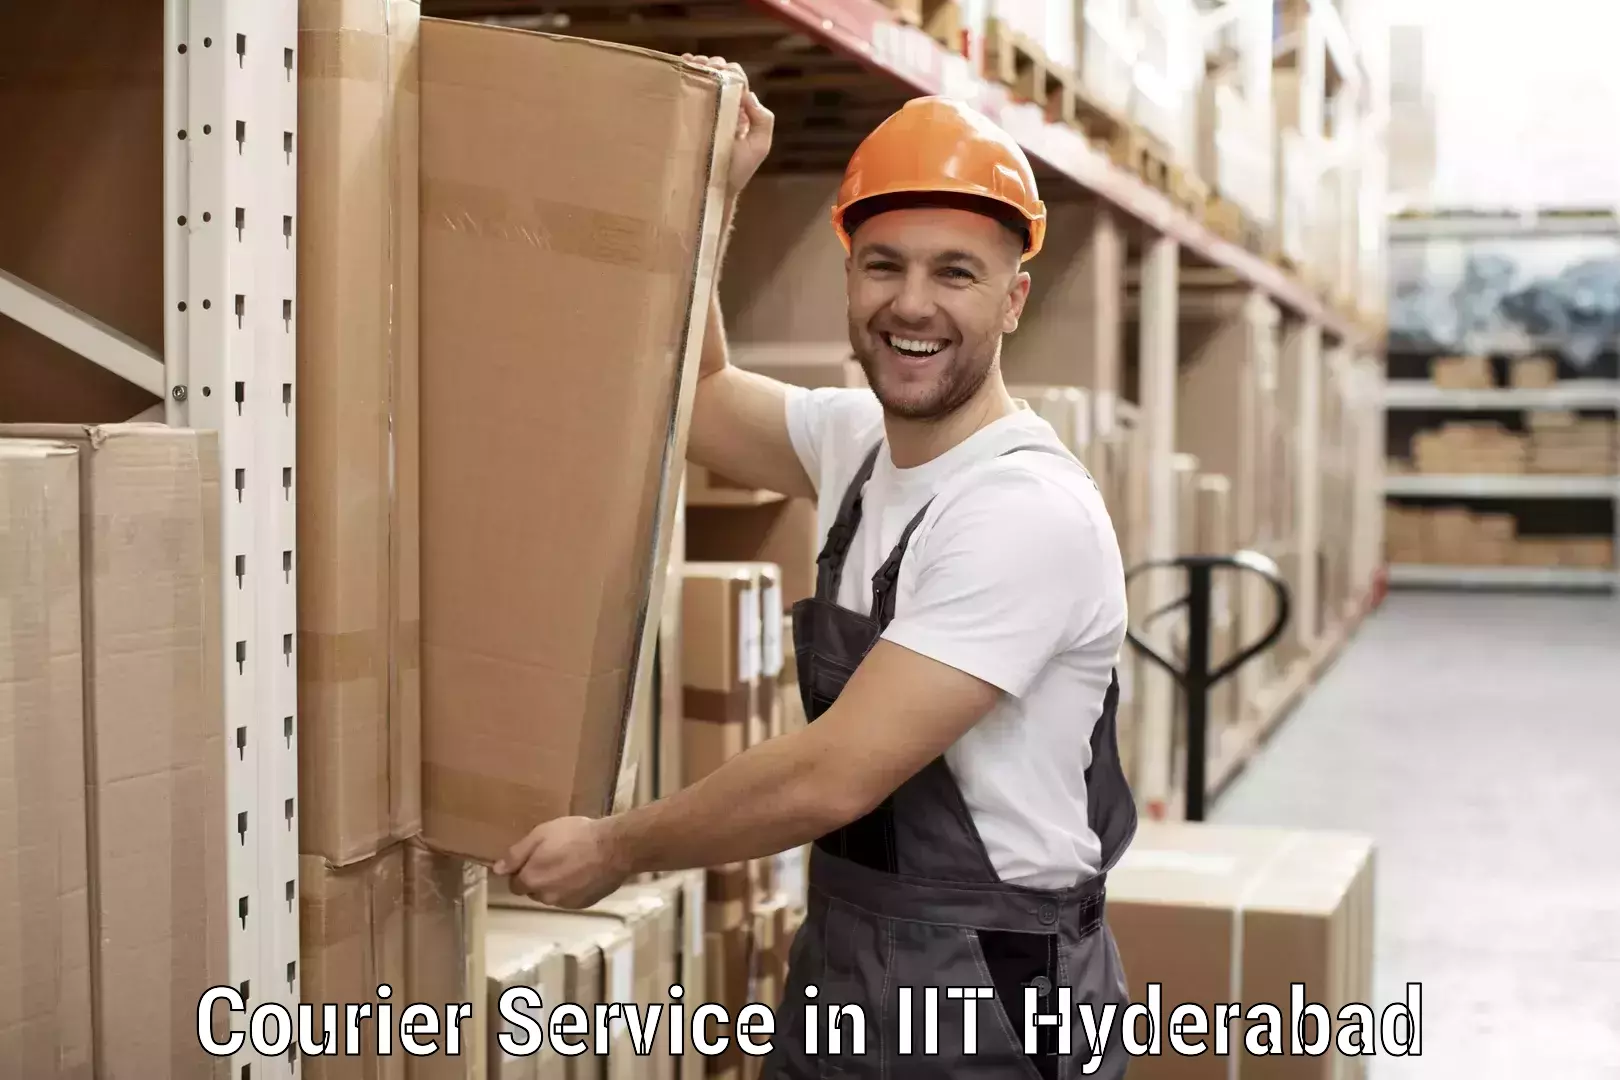 Streamlined delivery processes in IIT Hyderabad